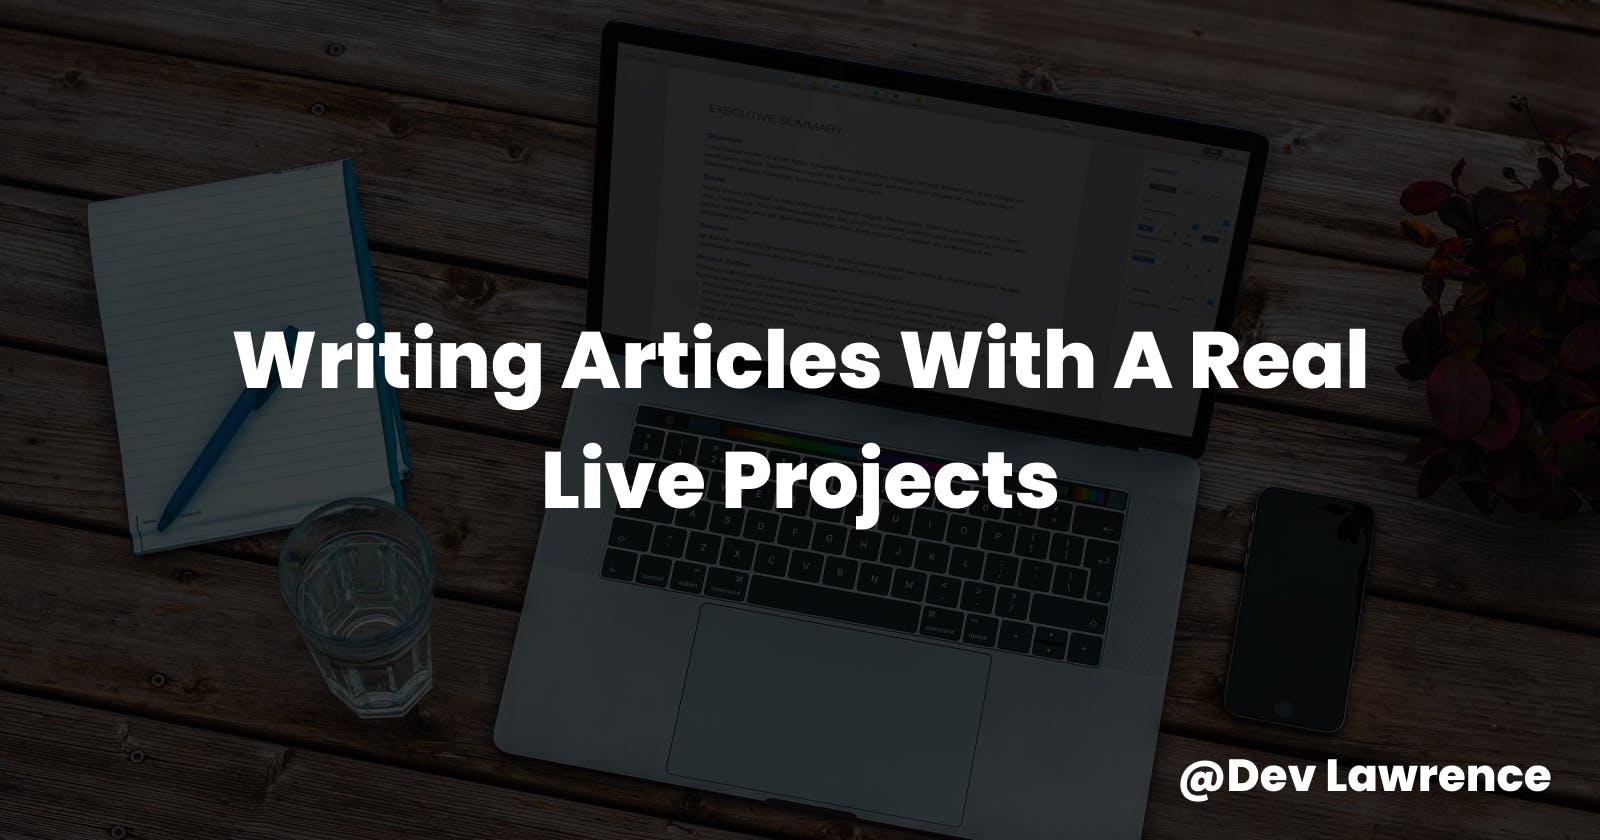 My approach on writing an article with a real live project